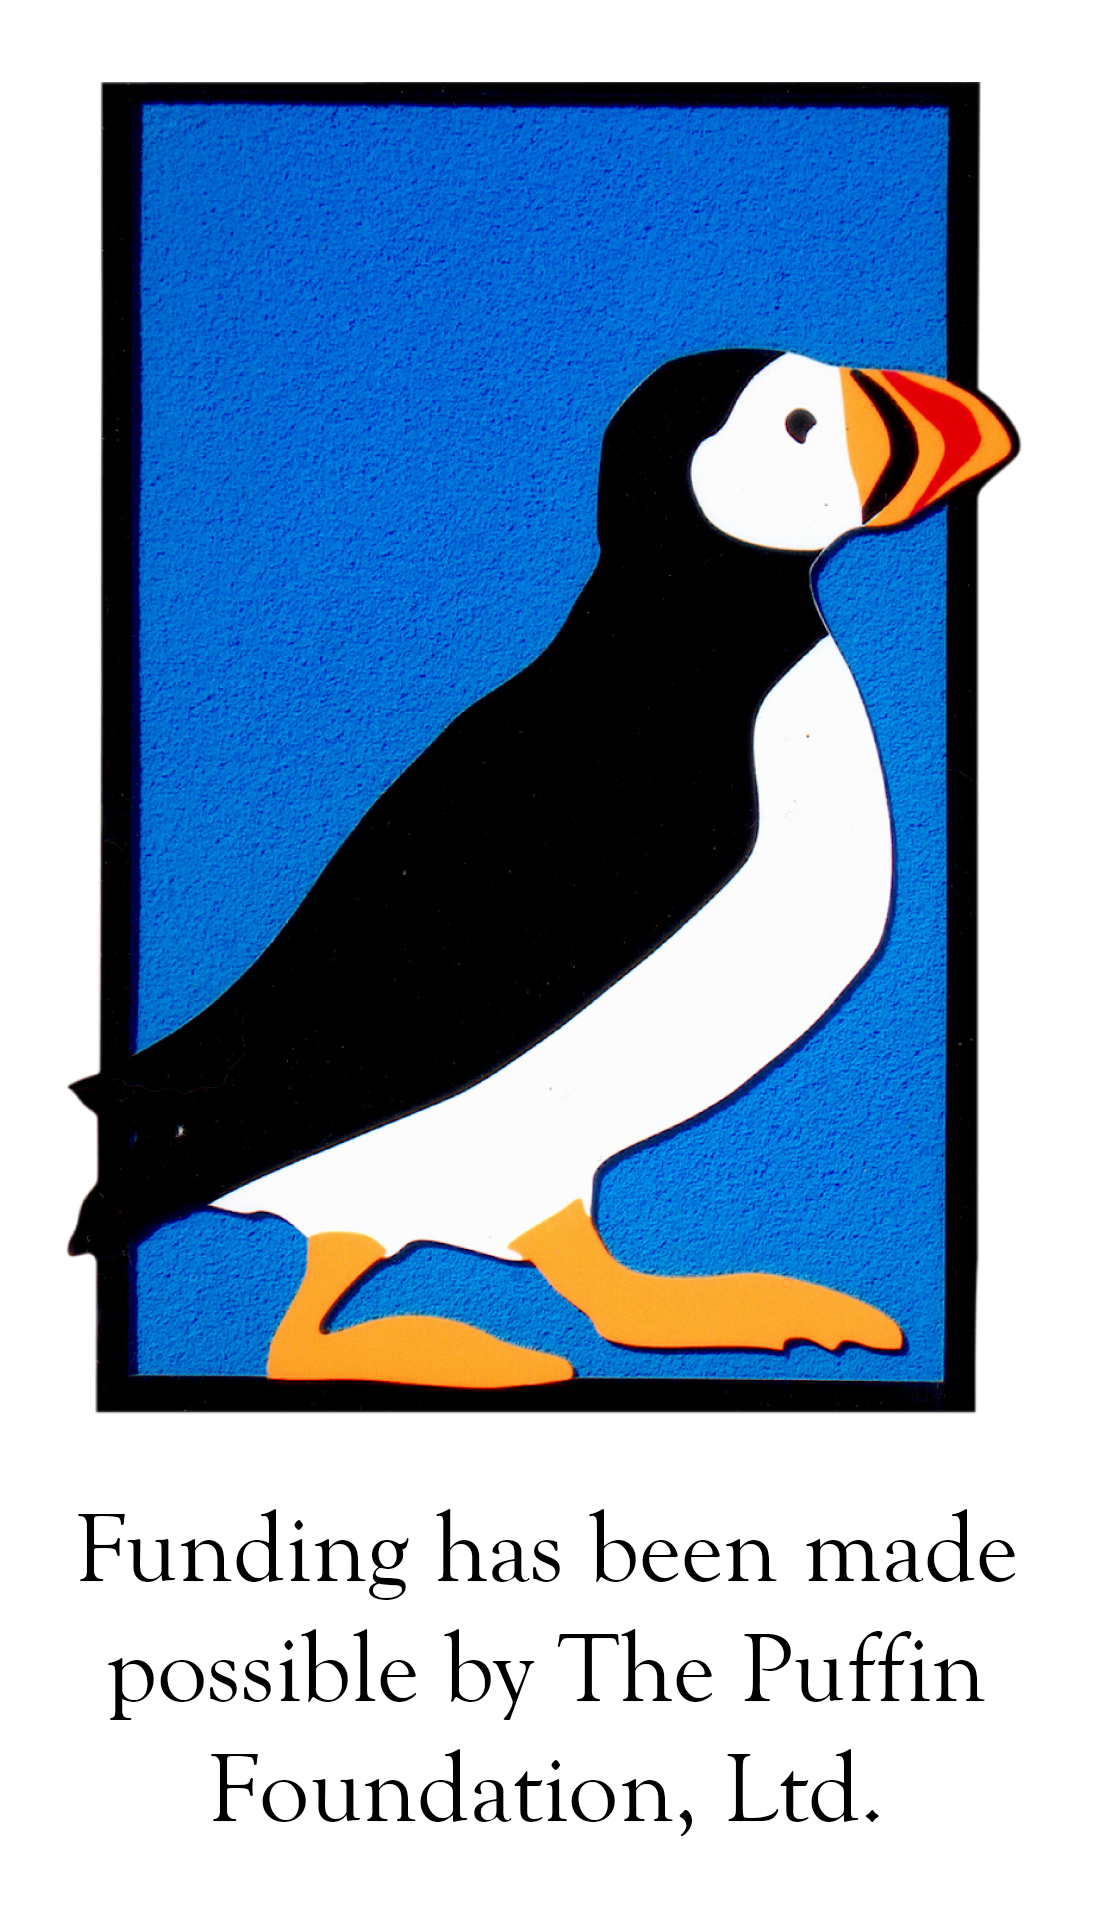 Funding has been made possible by The Puffin Foundation